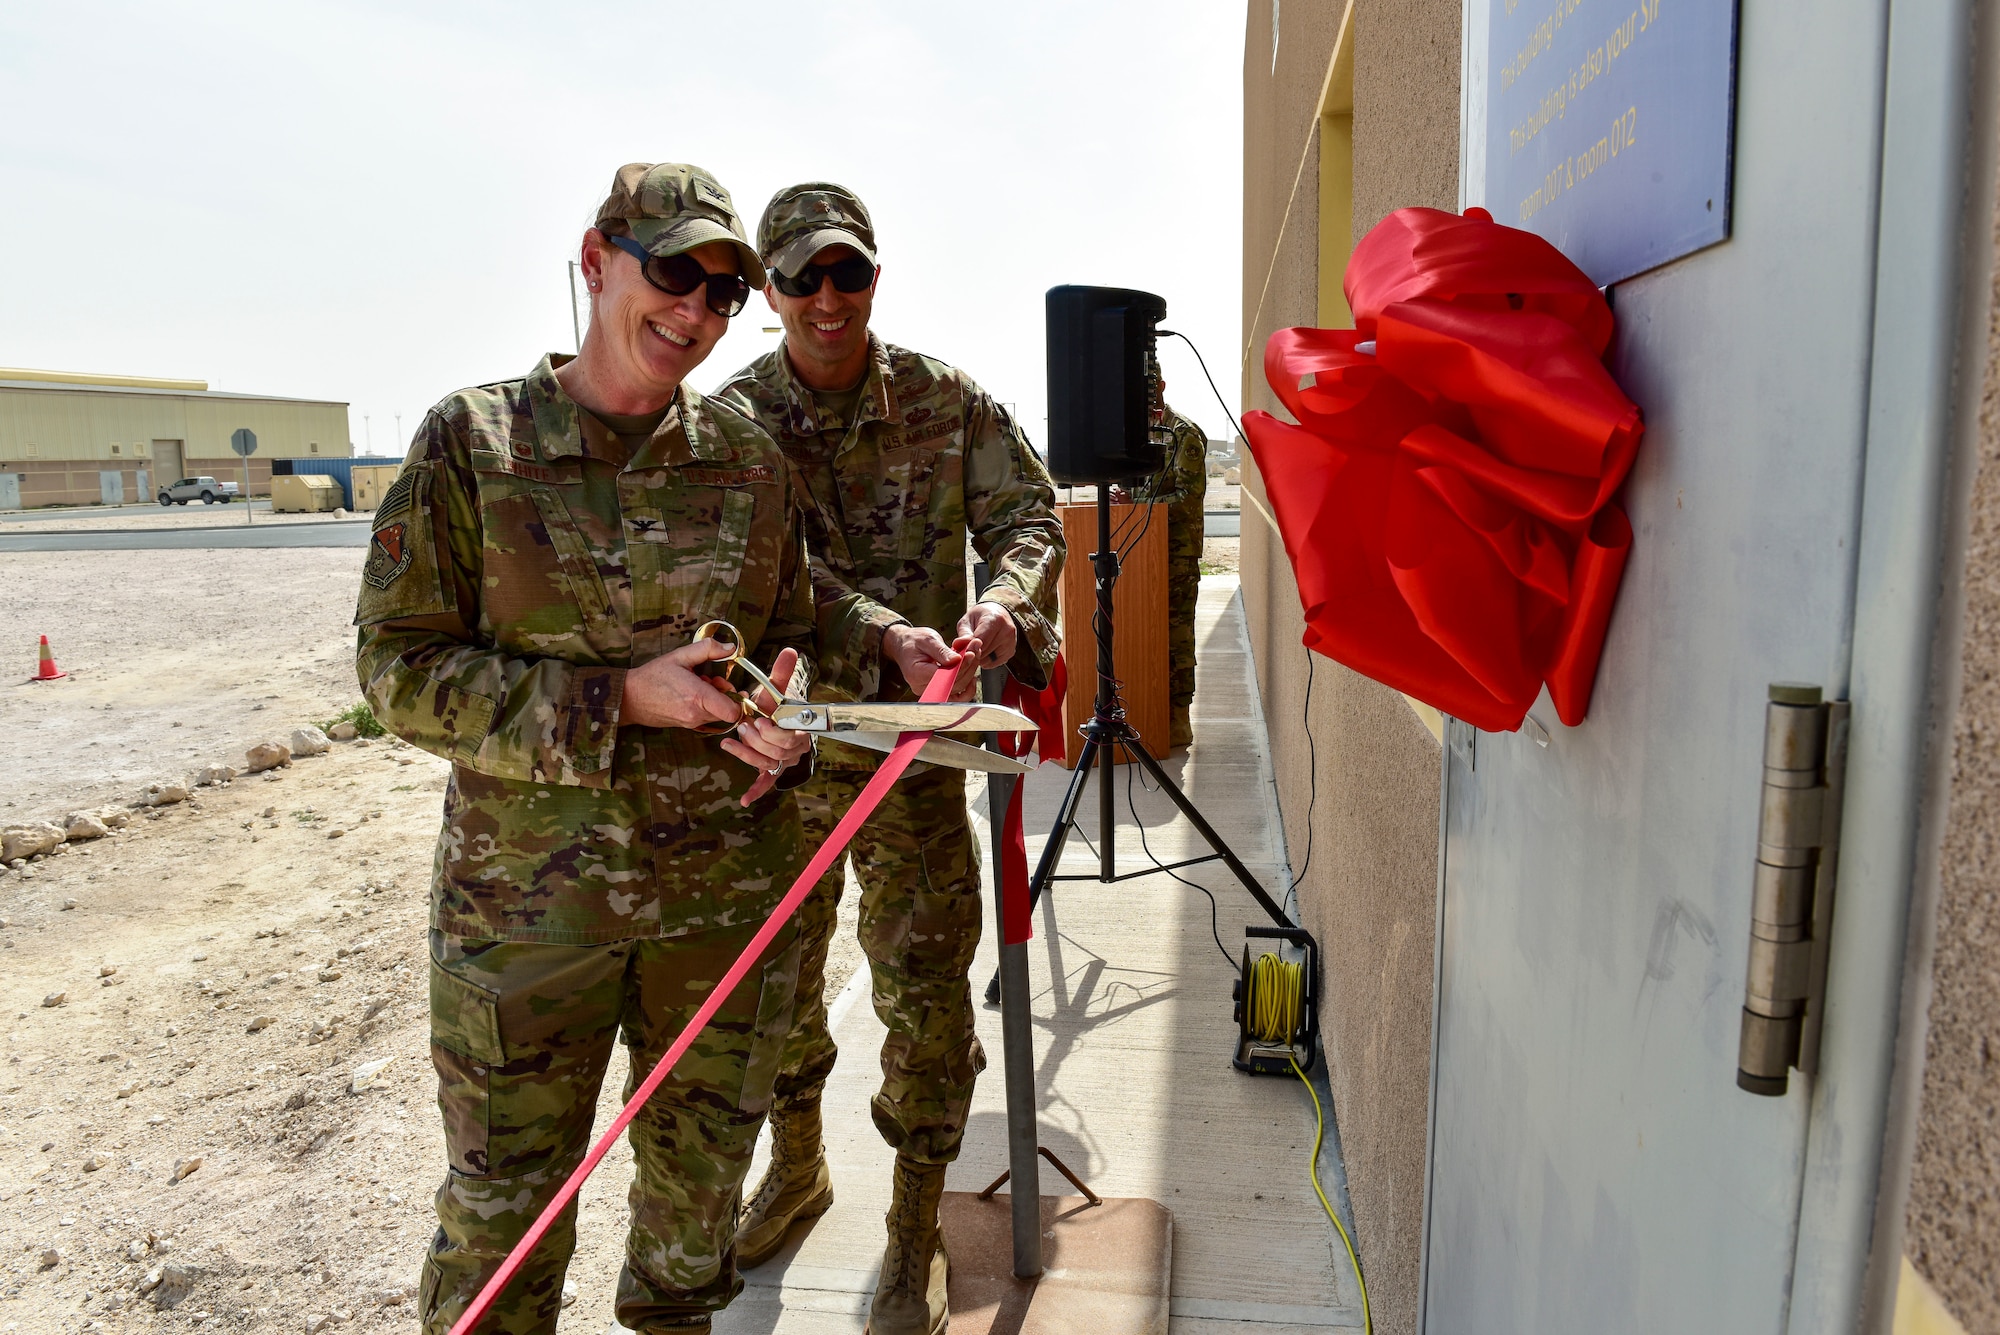 Col. Tara White, 379th Expeditionary Mission Support Group commander, and Maj. Jason Gargan, 379th Expeditionary Communications Squadron commander, cut a ribbon to commemorate the relocation of the wing's communication security office at Al Udeid Air Base, Qatar on Feb. 2, 2020. The new location is designed to enhance security and access for more than 40 unit account holders and 1,400 customers who rely on encrypted communication to conduct their missions throughout the U.S. Central Command area of responsibility. (U.S. Air Force photo by Tech. Sgt. John Wilkes)